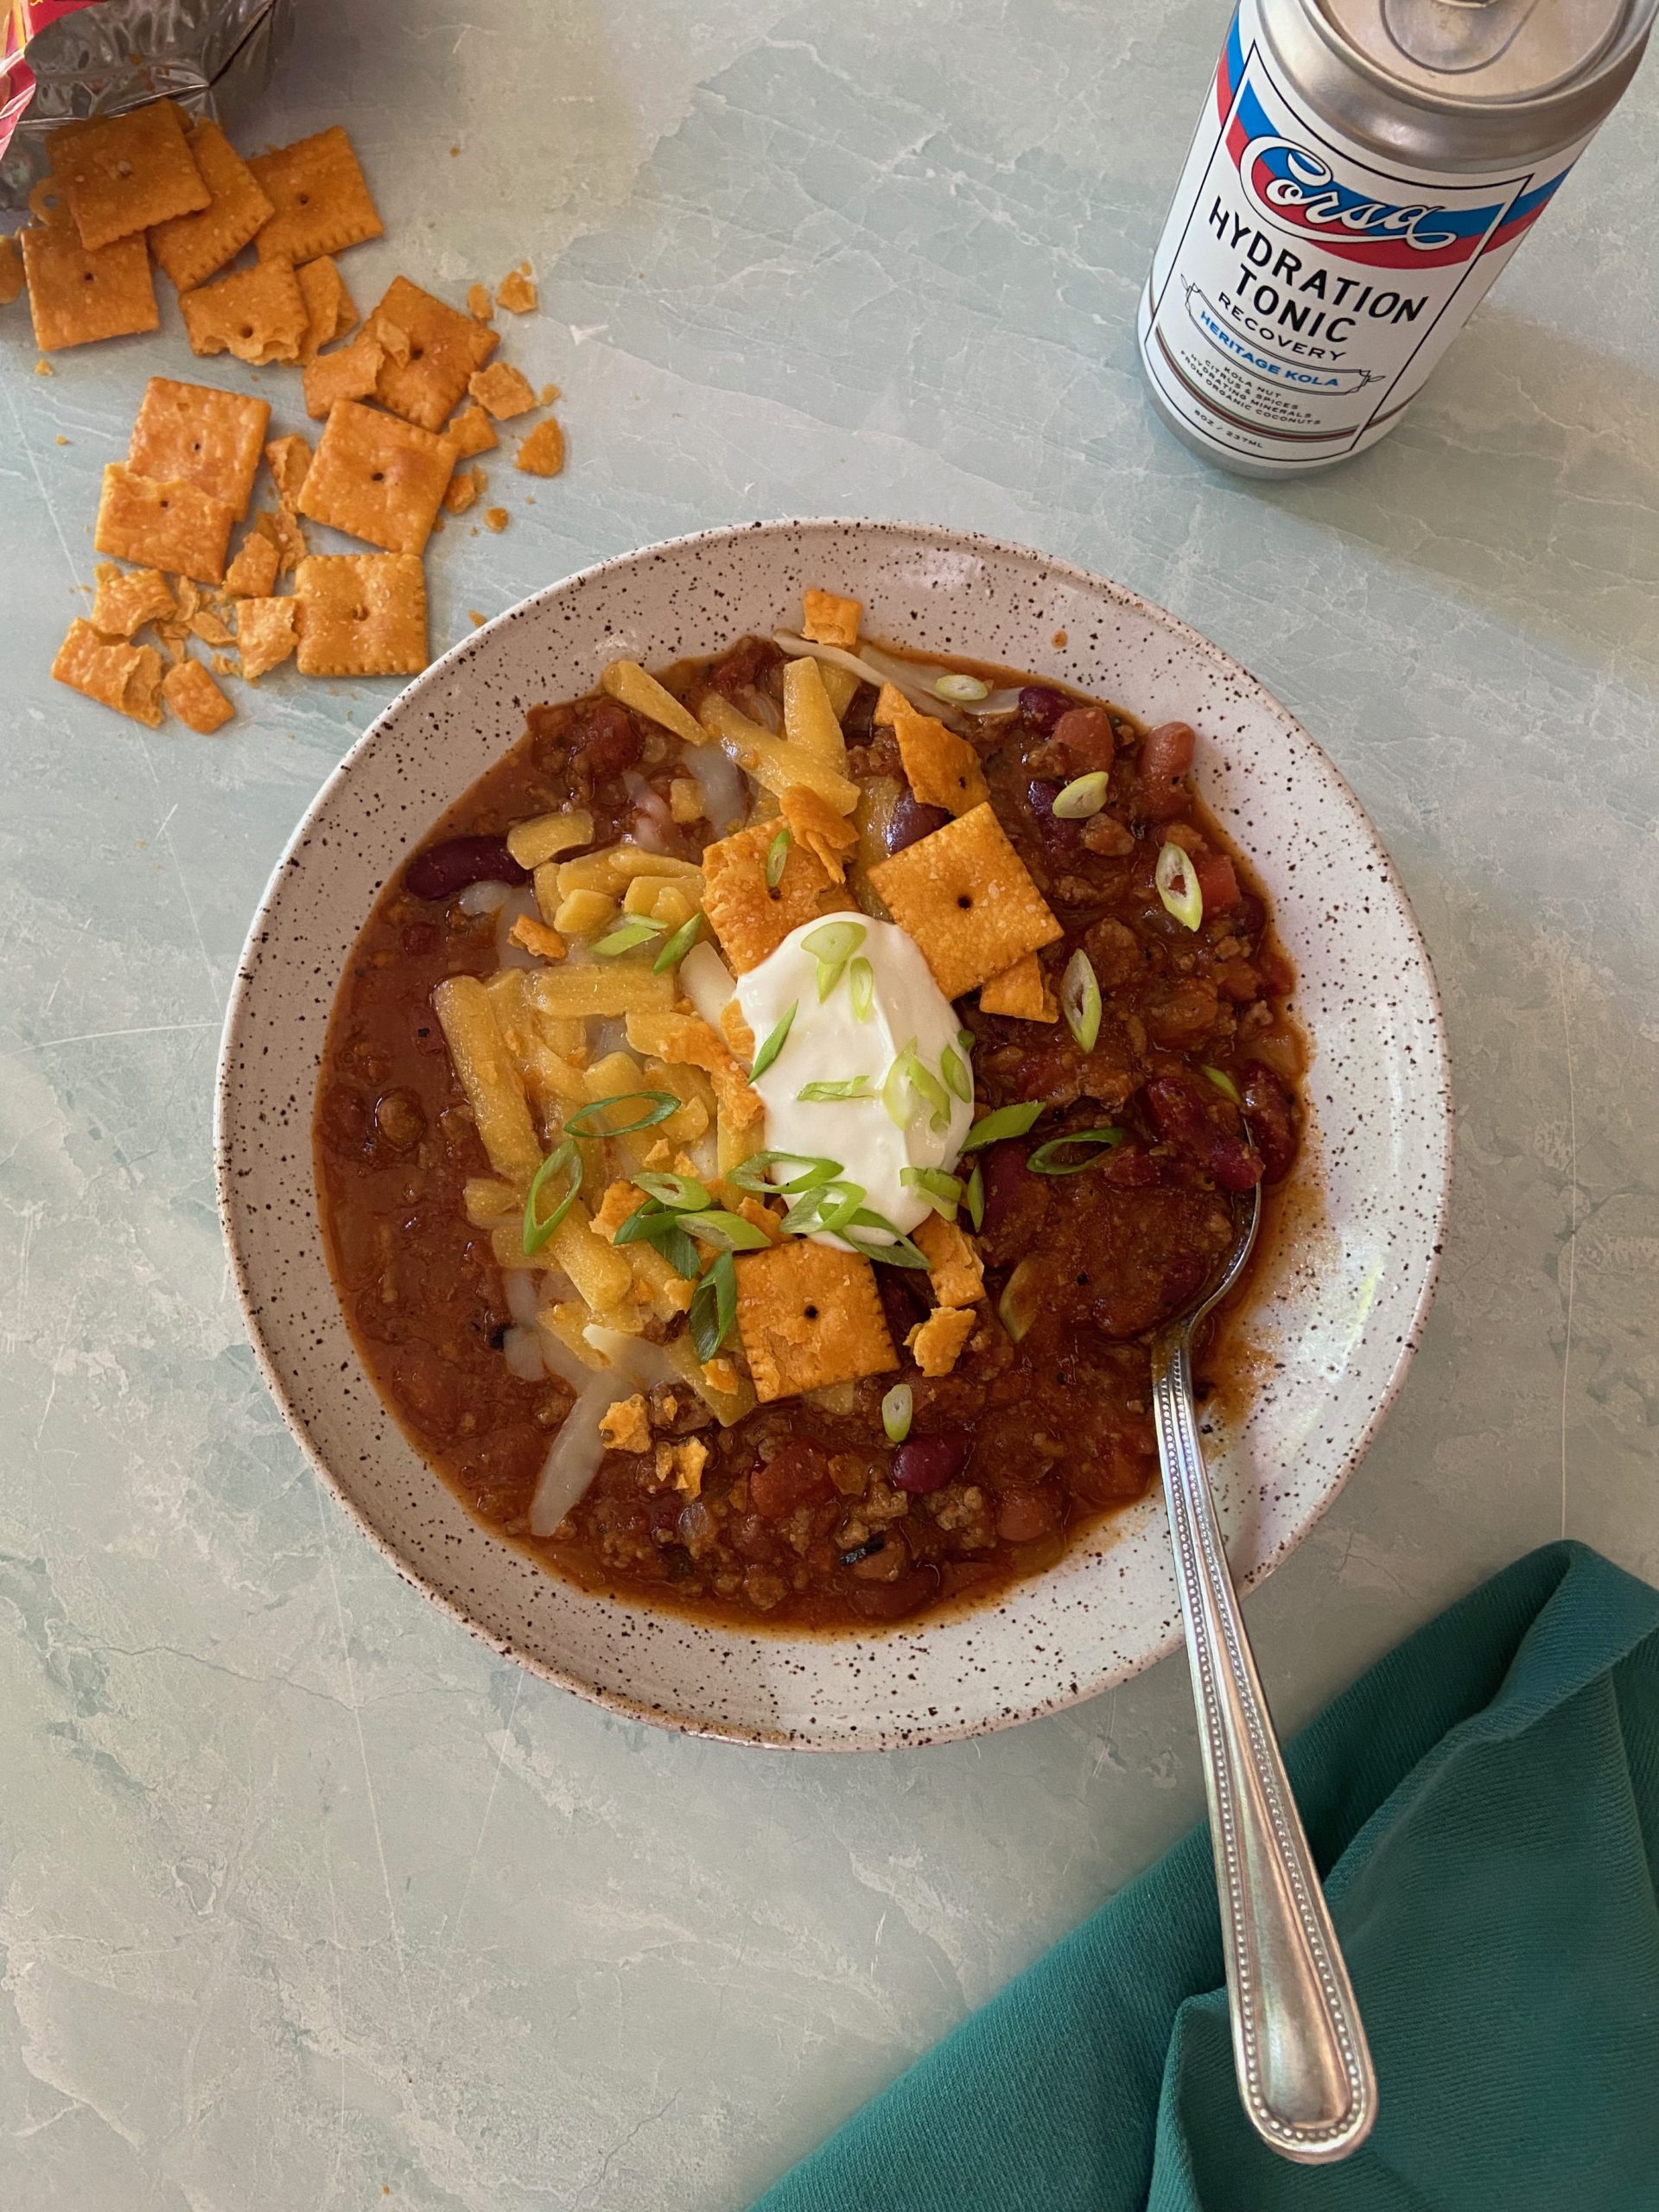 "All the Cans" Chili recipe: The easy, weeknight chili recipe of your dreams | Didn't I Just Feed You podcast